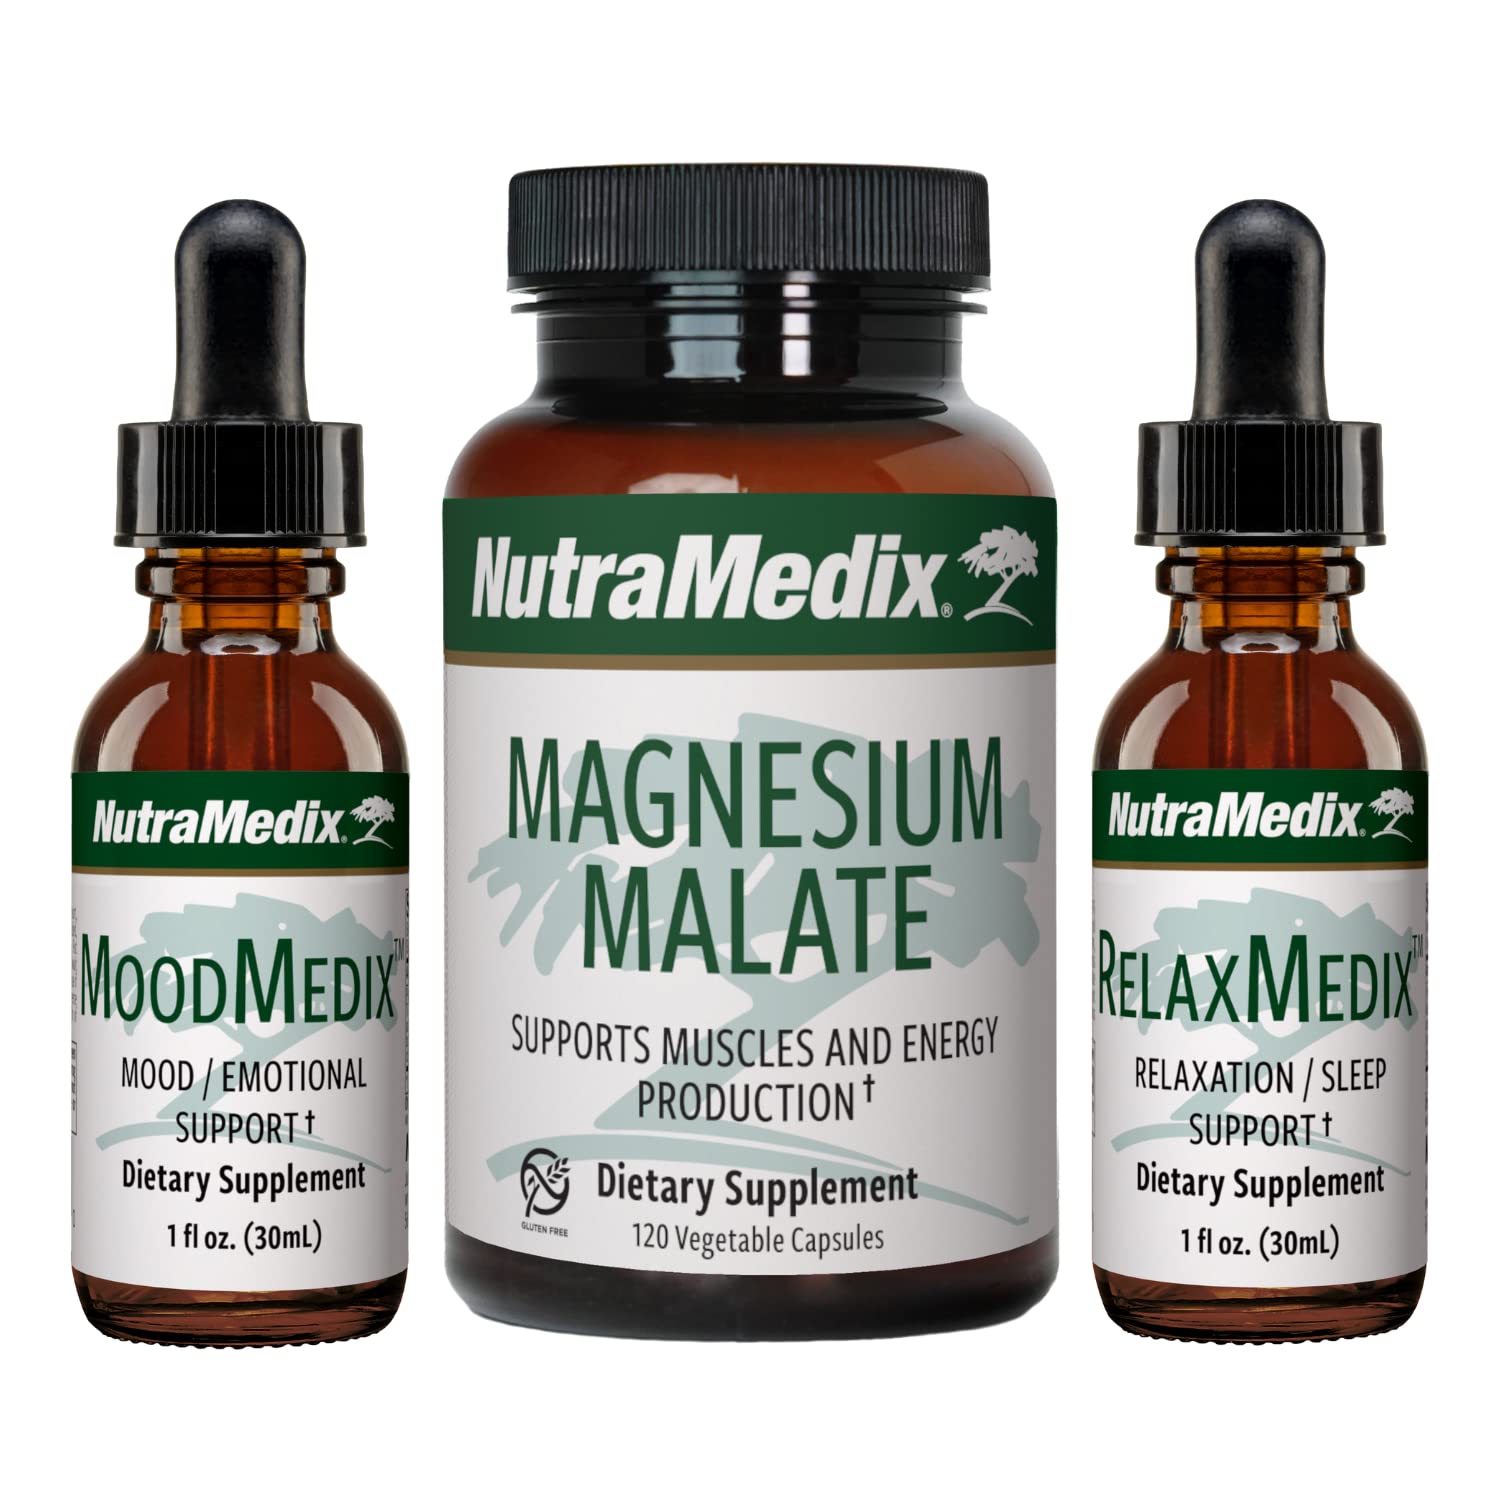 NutraMedix Stress Support Bundle - Supplements for Stress Support and Healthy Stress Response - Includes Magnesium Malate, MoodMedix & RelaxMedix - Liquid Extracts & Capsules for Stress - 3-Piece Set